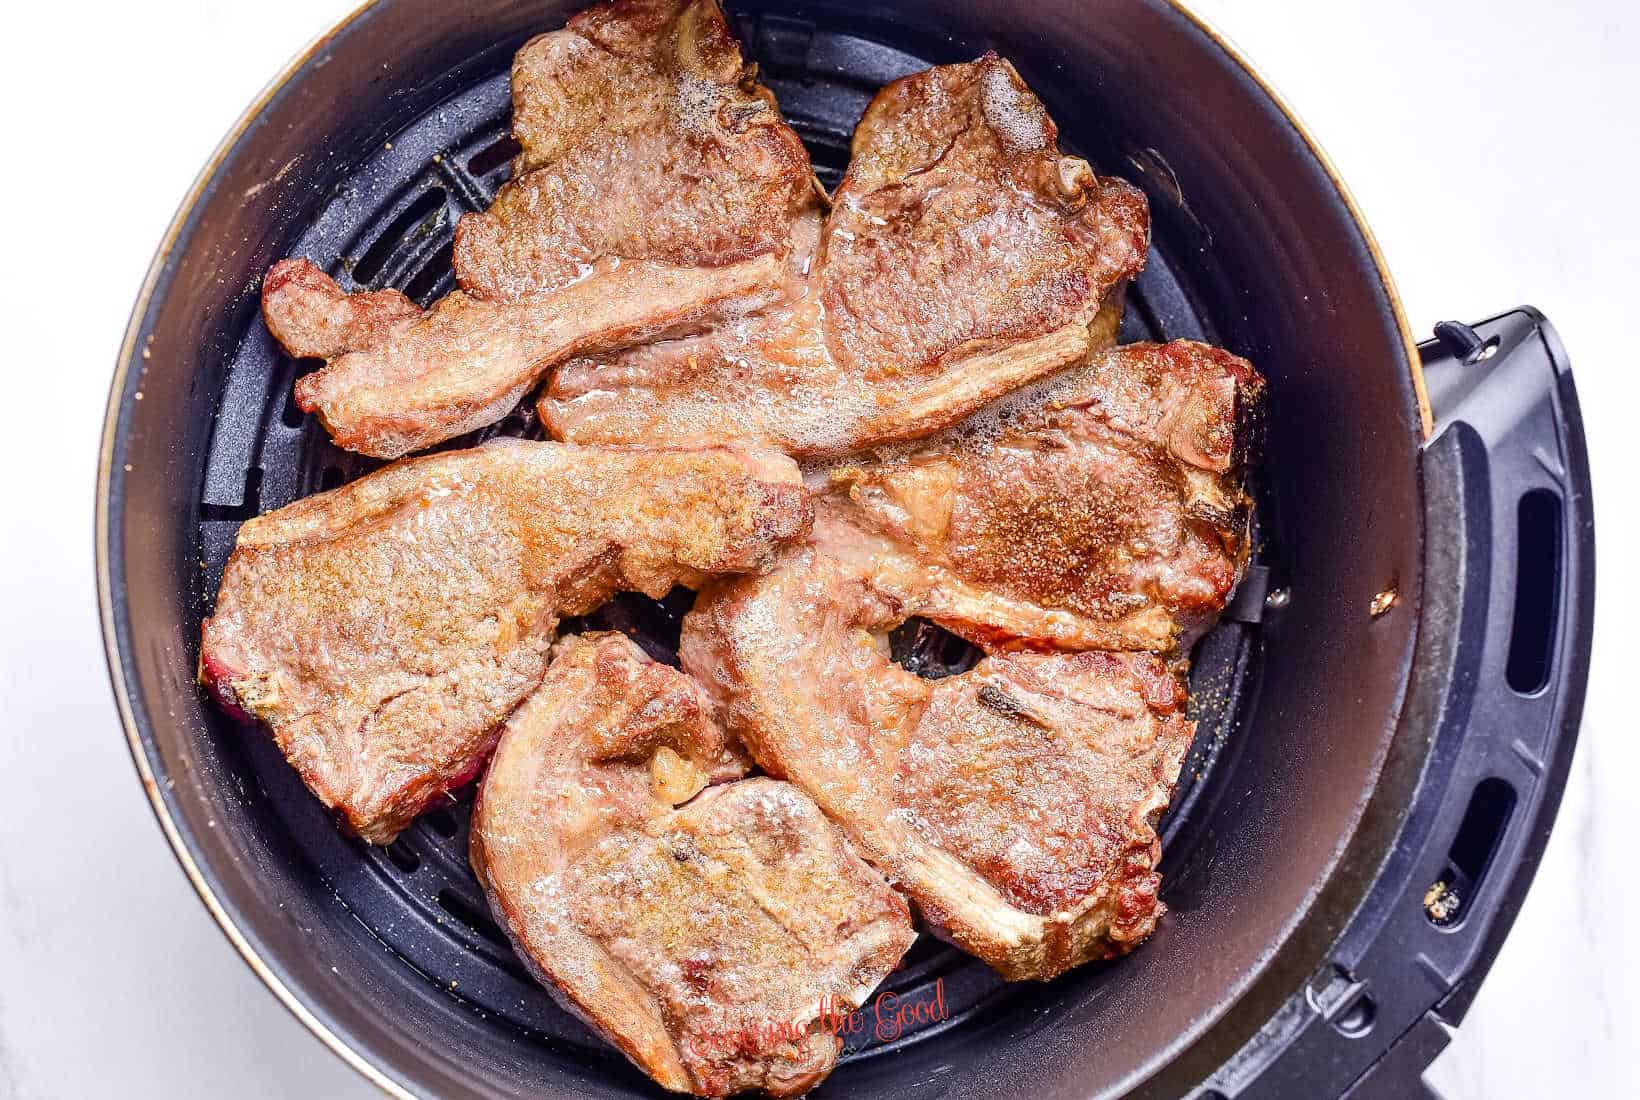 lamb chops in the basket of an air fryer basket starting to cook.